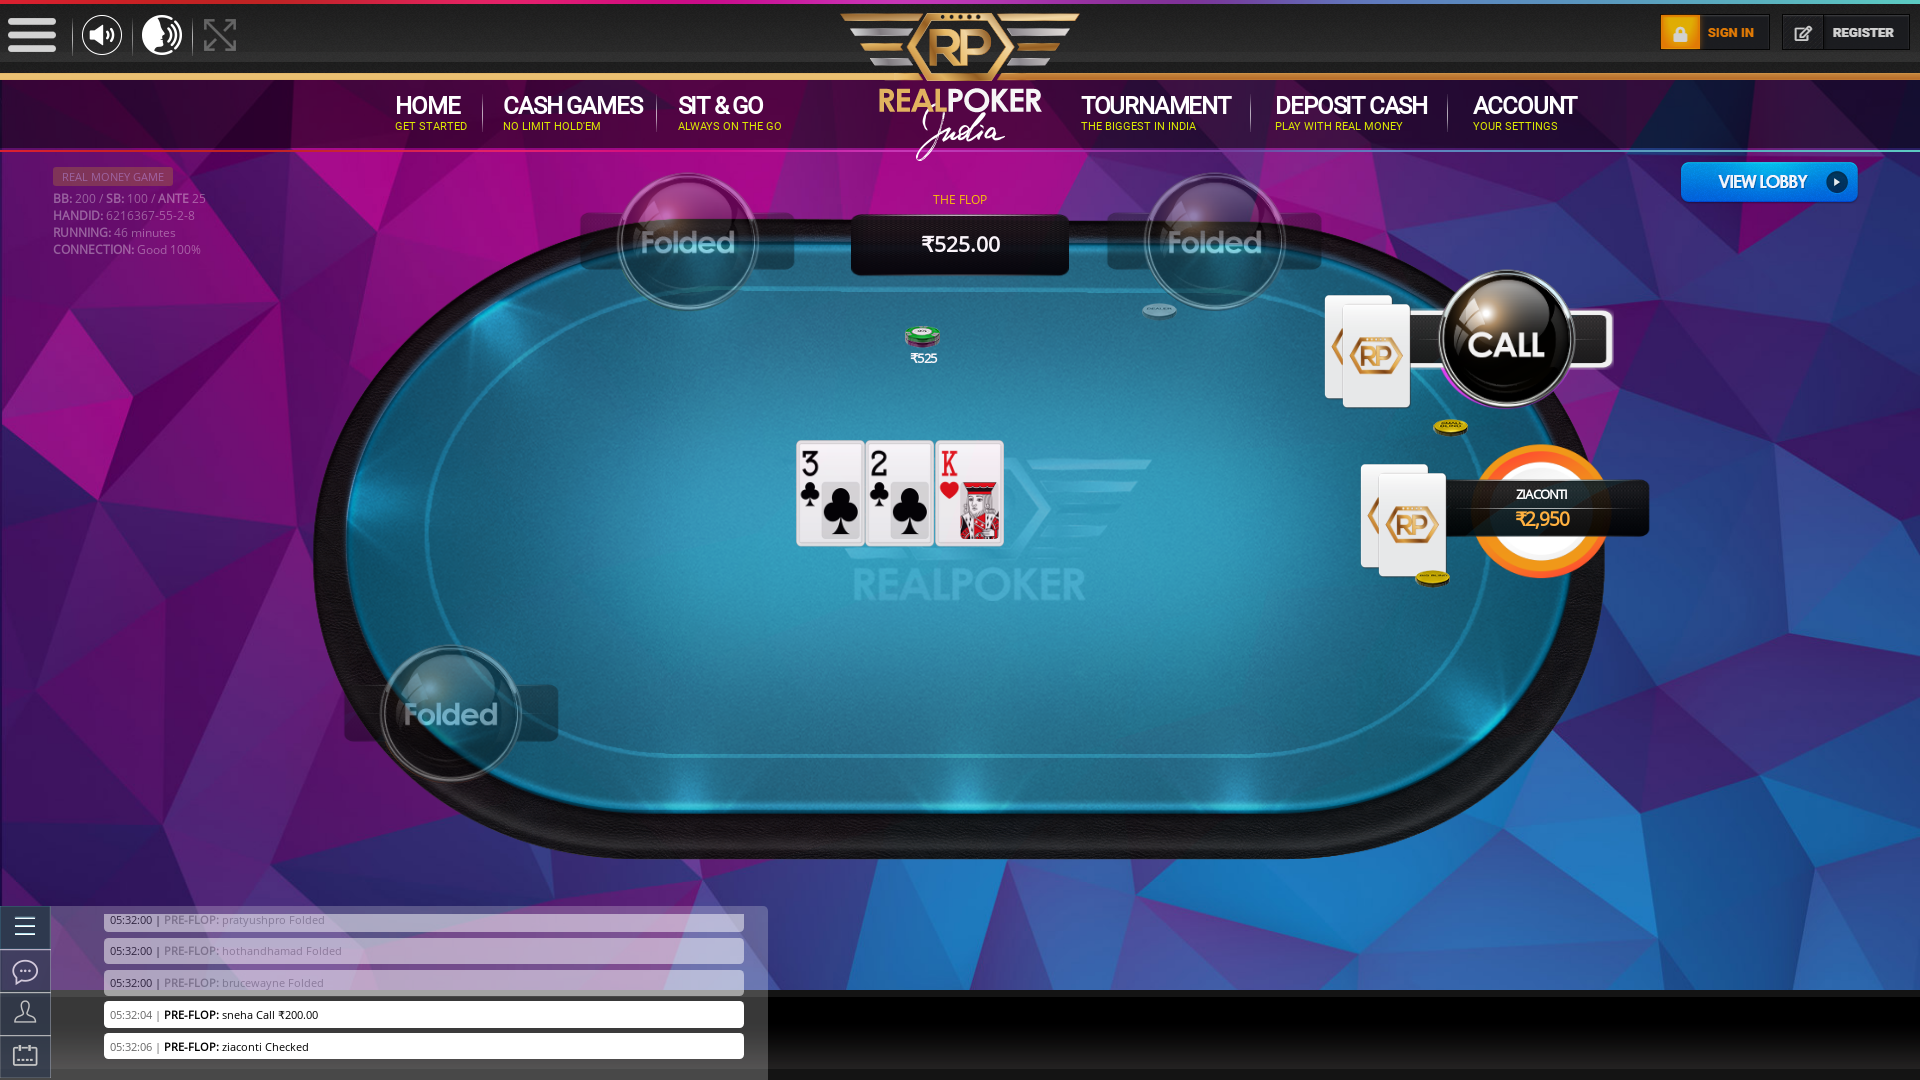 indian poker on a 10 player table in the 46th minute